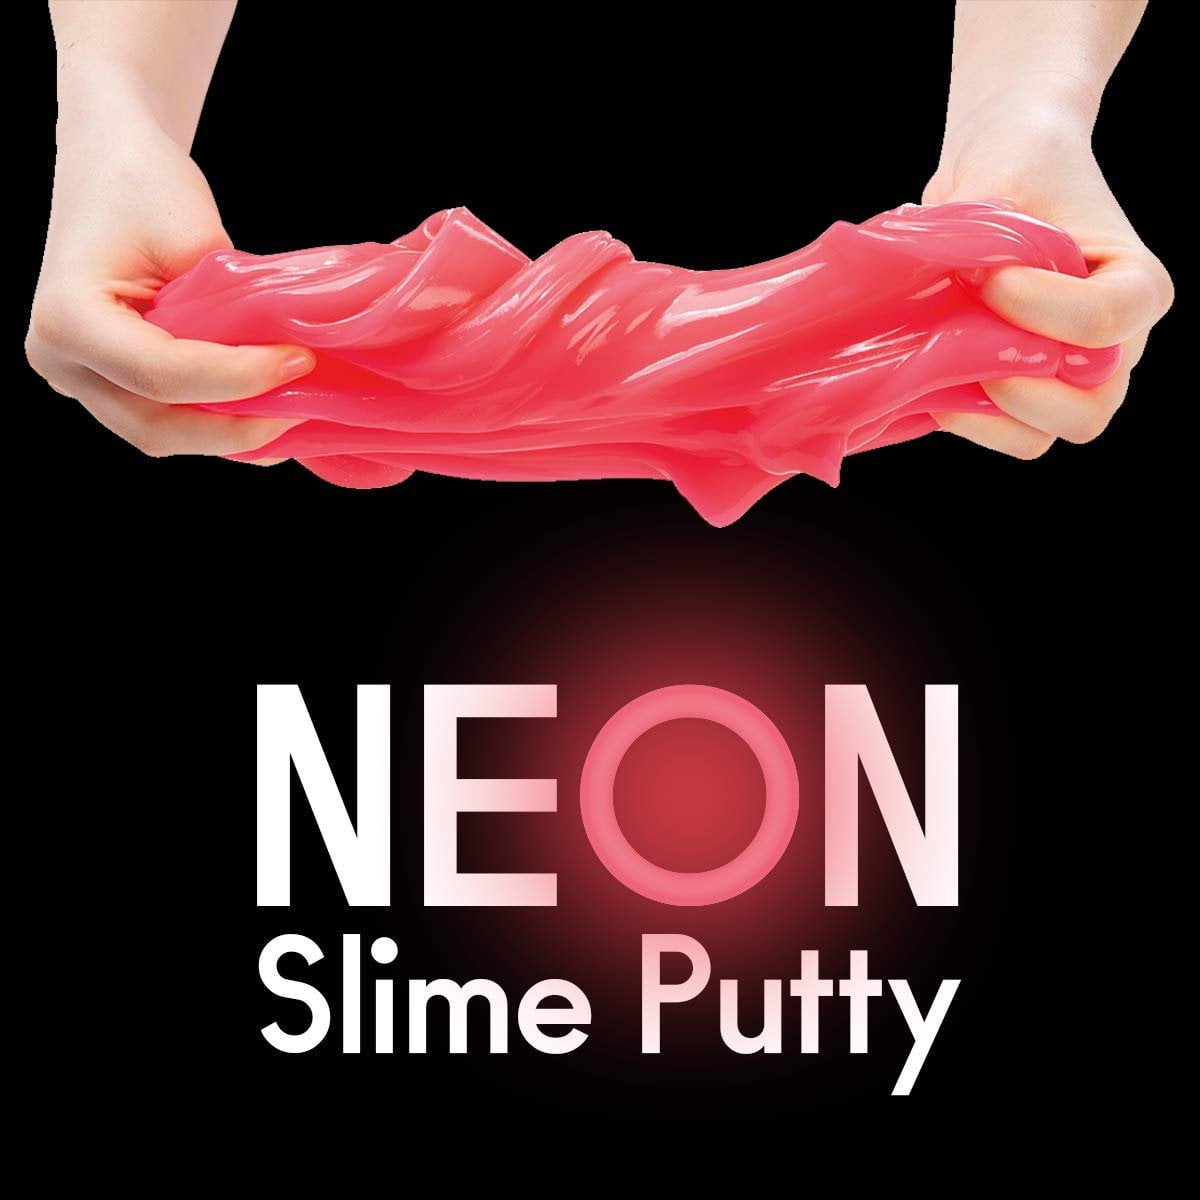 Kicko Neon Slime Putty Sludgy Gooey Feeling Great for Any... Pack of 6 